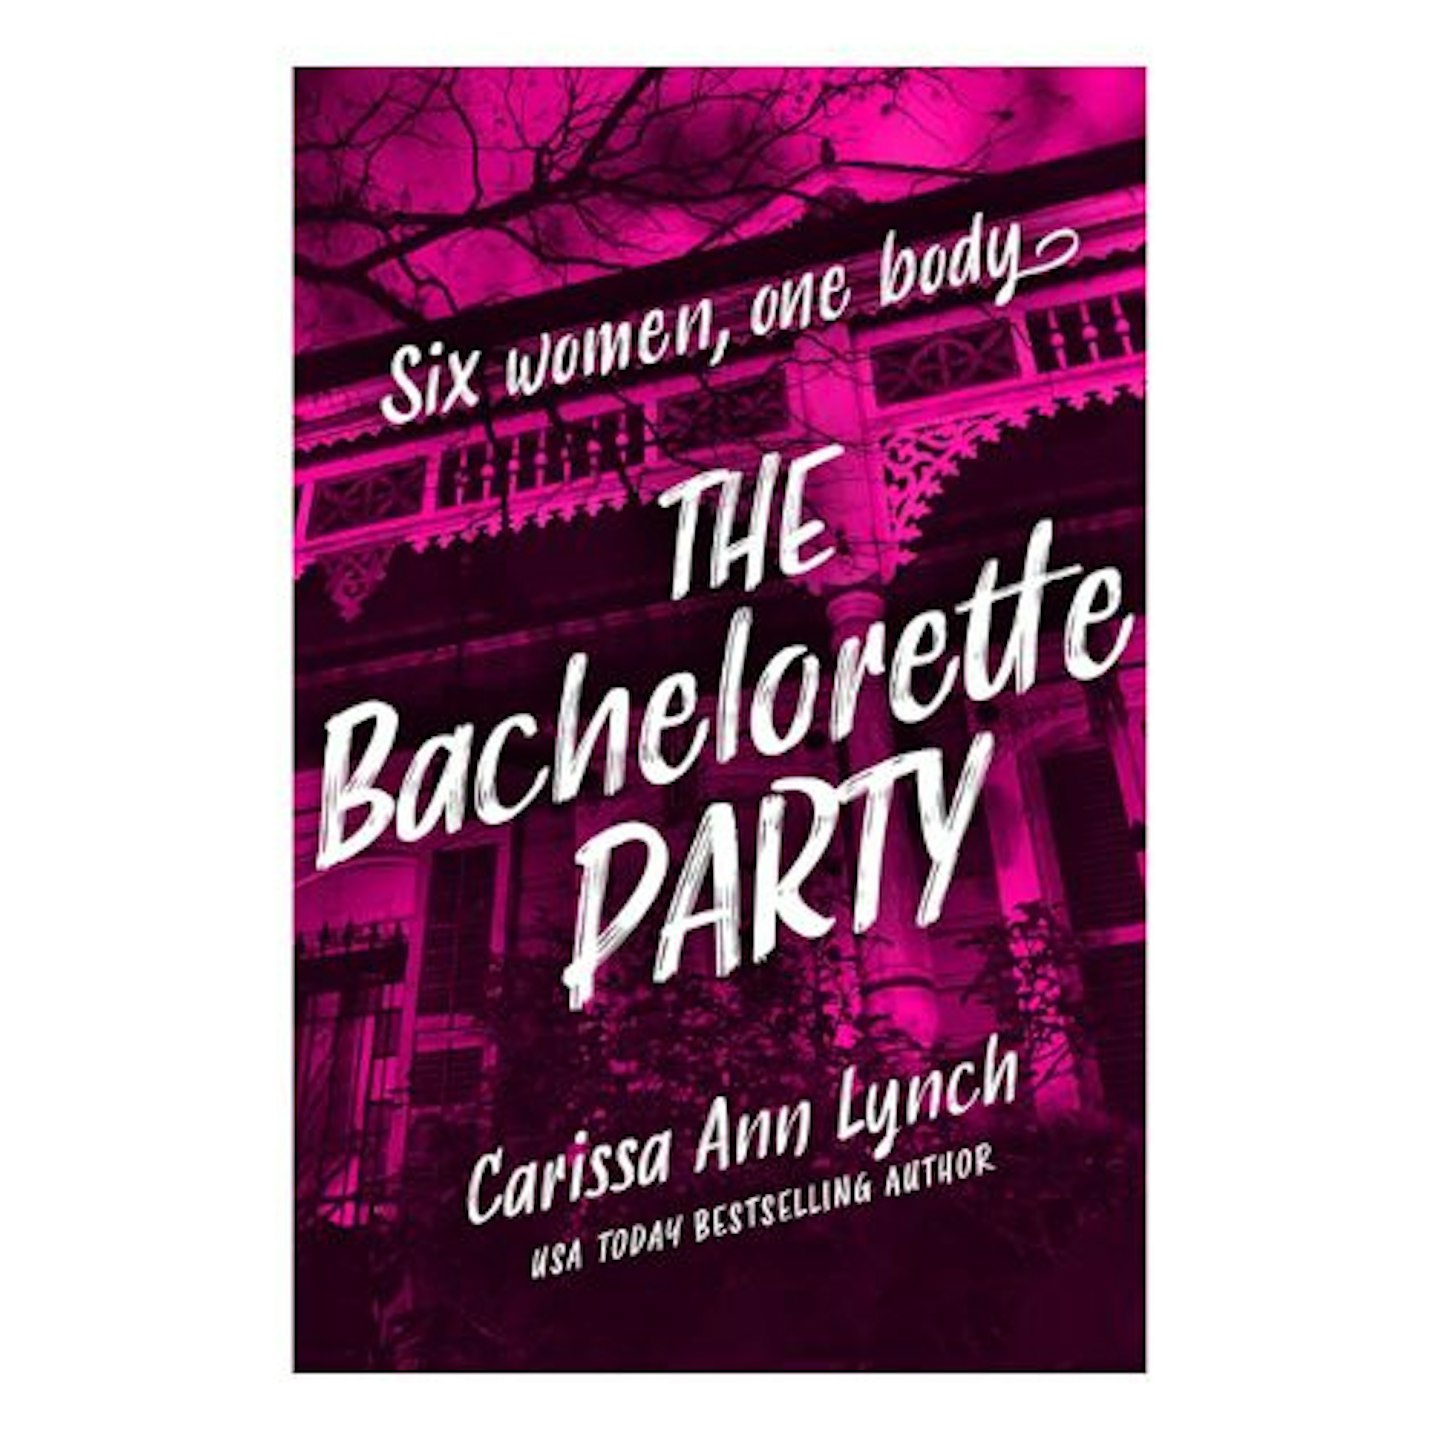 The Bachelorette Party: The unmissable crime thriller from the USA Today bestselling author Paperback – 24 Nov. 2022